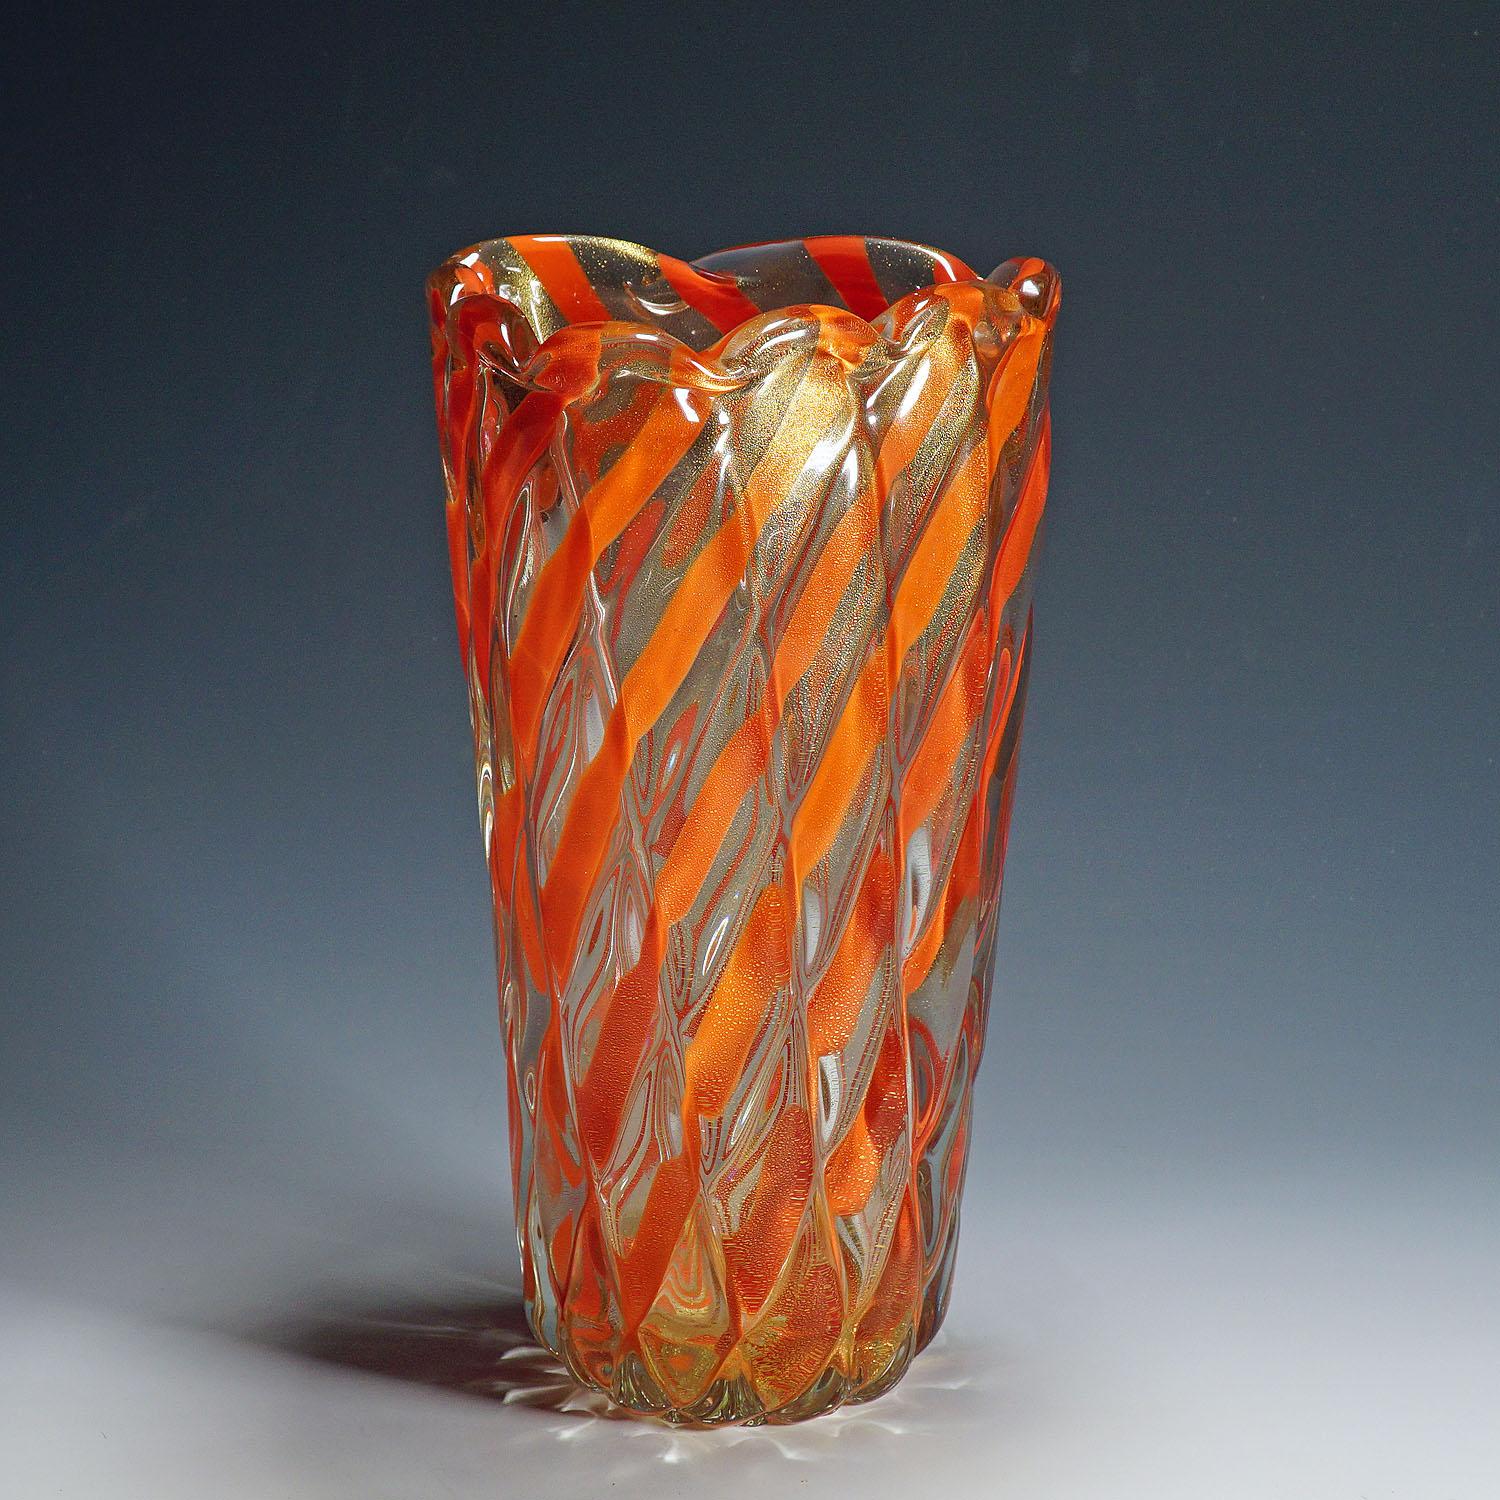 Alfredo Barbini ribbed 'Corallo Oro' Vase, 1960s.

A large Venetian art glass vase designed by Alfredo Barbini for Vetreria Alfredo Barbini ca. 1960s. Thick ribbed and twisted glass with coral red ribbons and gold foil inclusions. An authentic piece